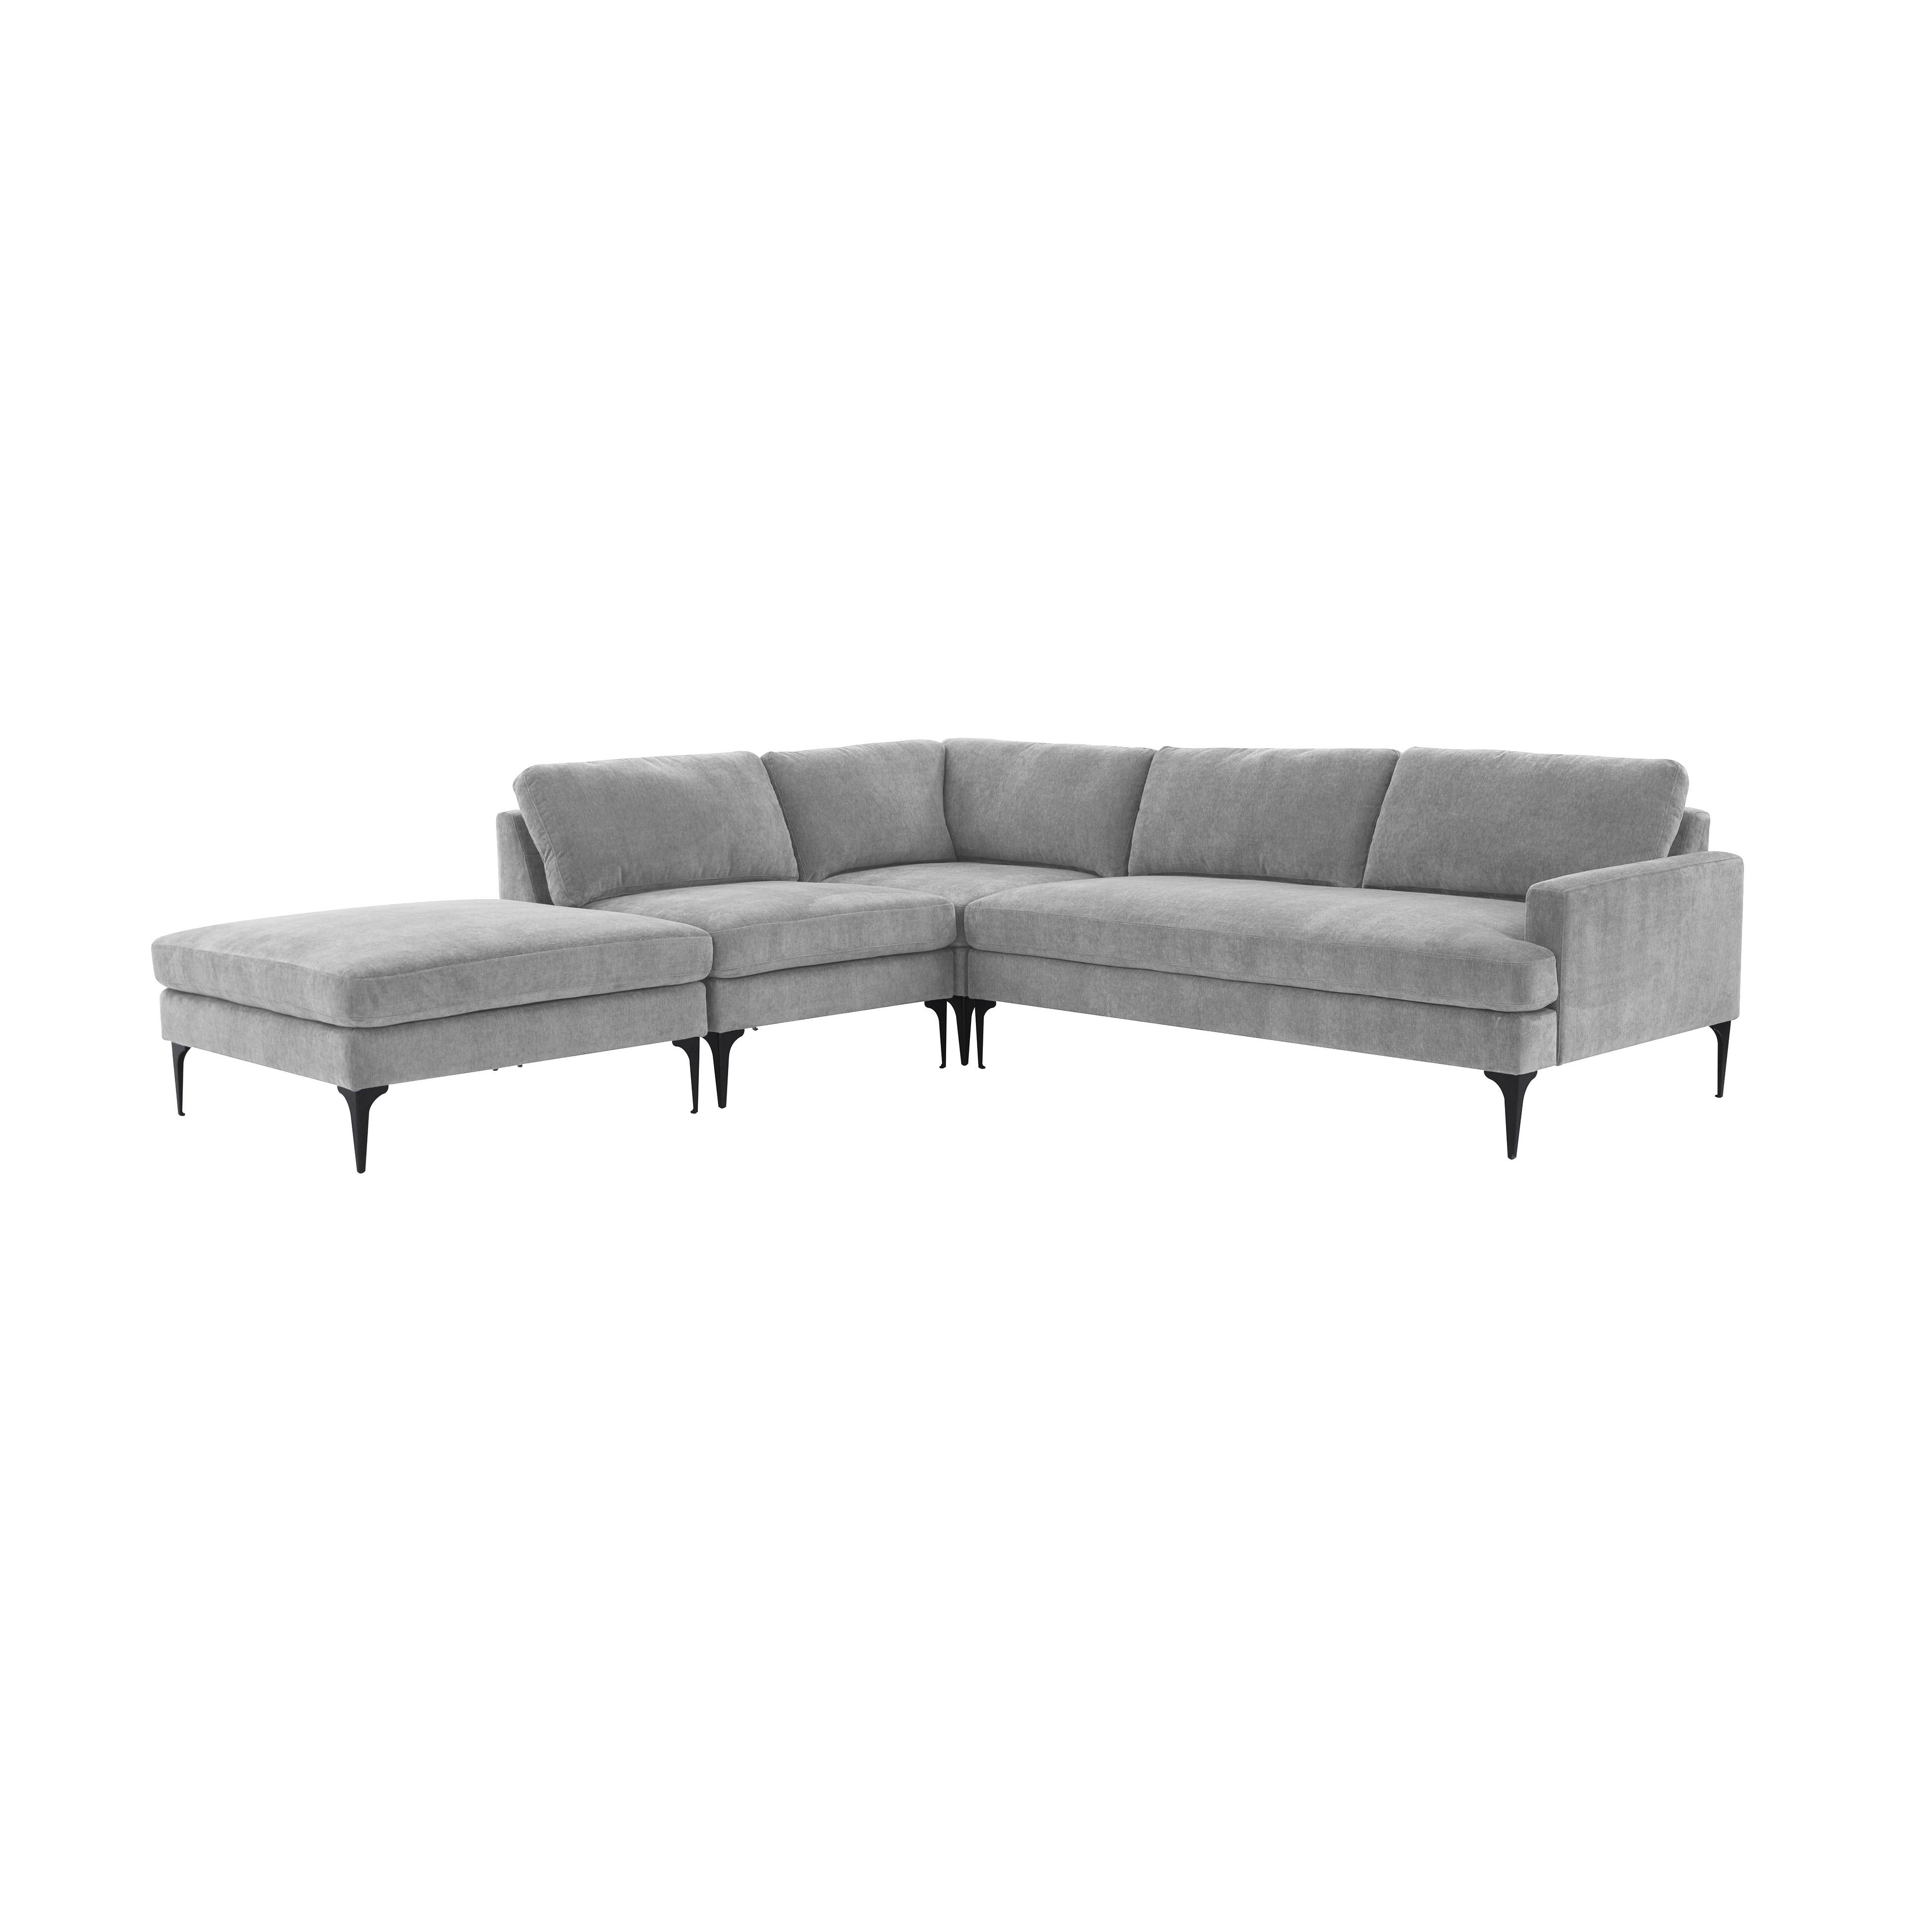 Tov Furniture Sectionals - Serena Gray Velvet Large LAF Chaise Sectional with Black Legs